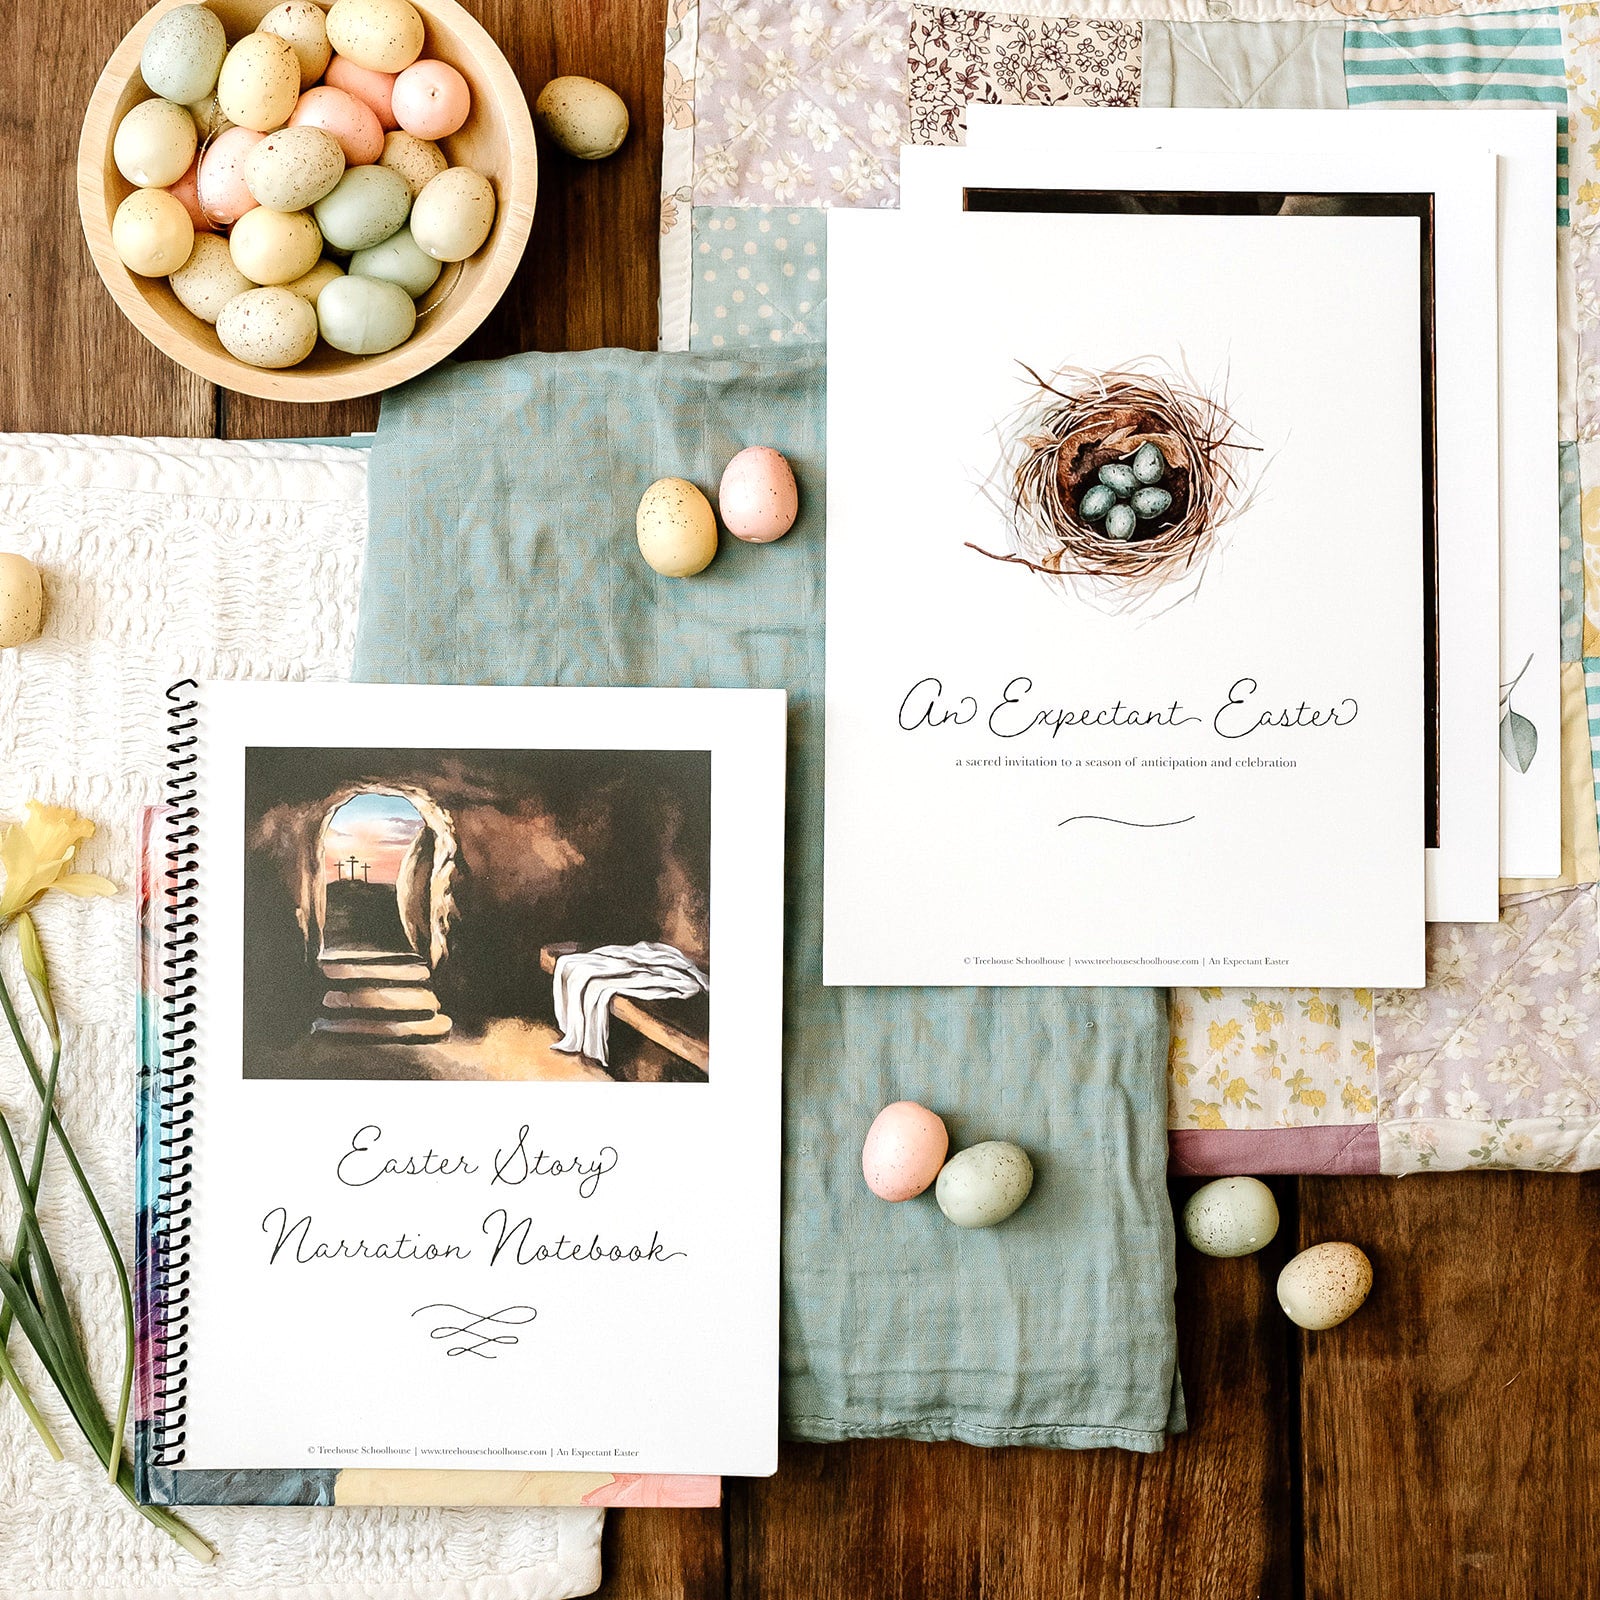 An Expectant Easter - Narration Notebook &amp; Student Sheets (Hard Copy)